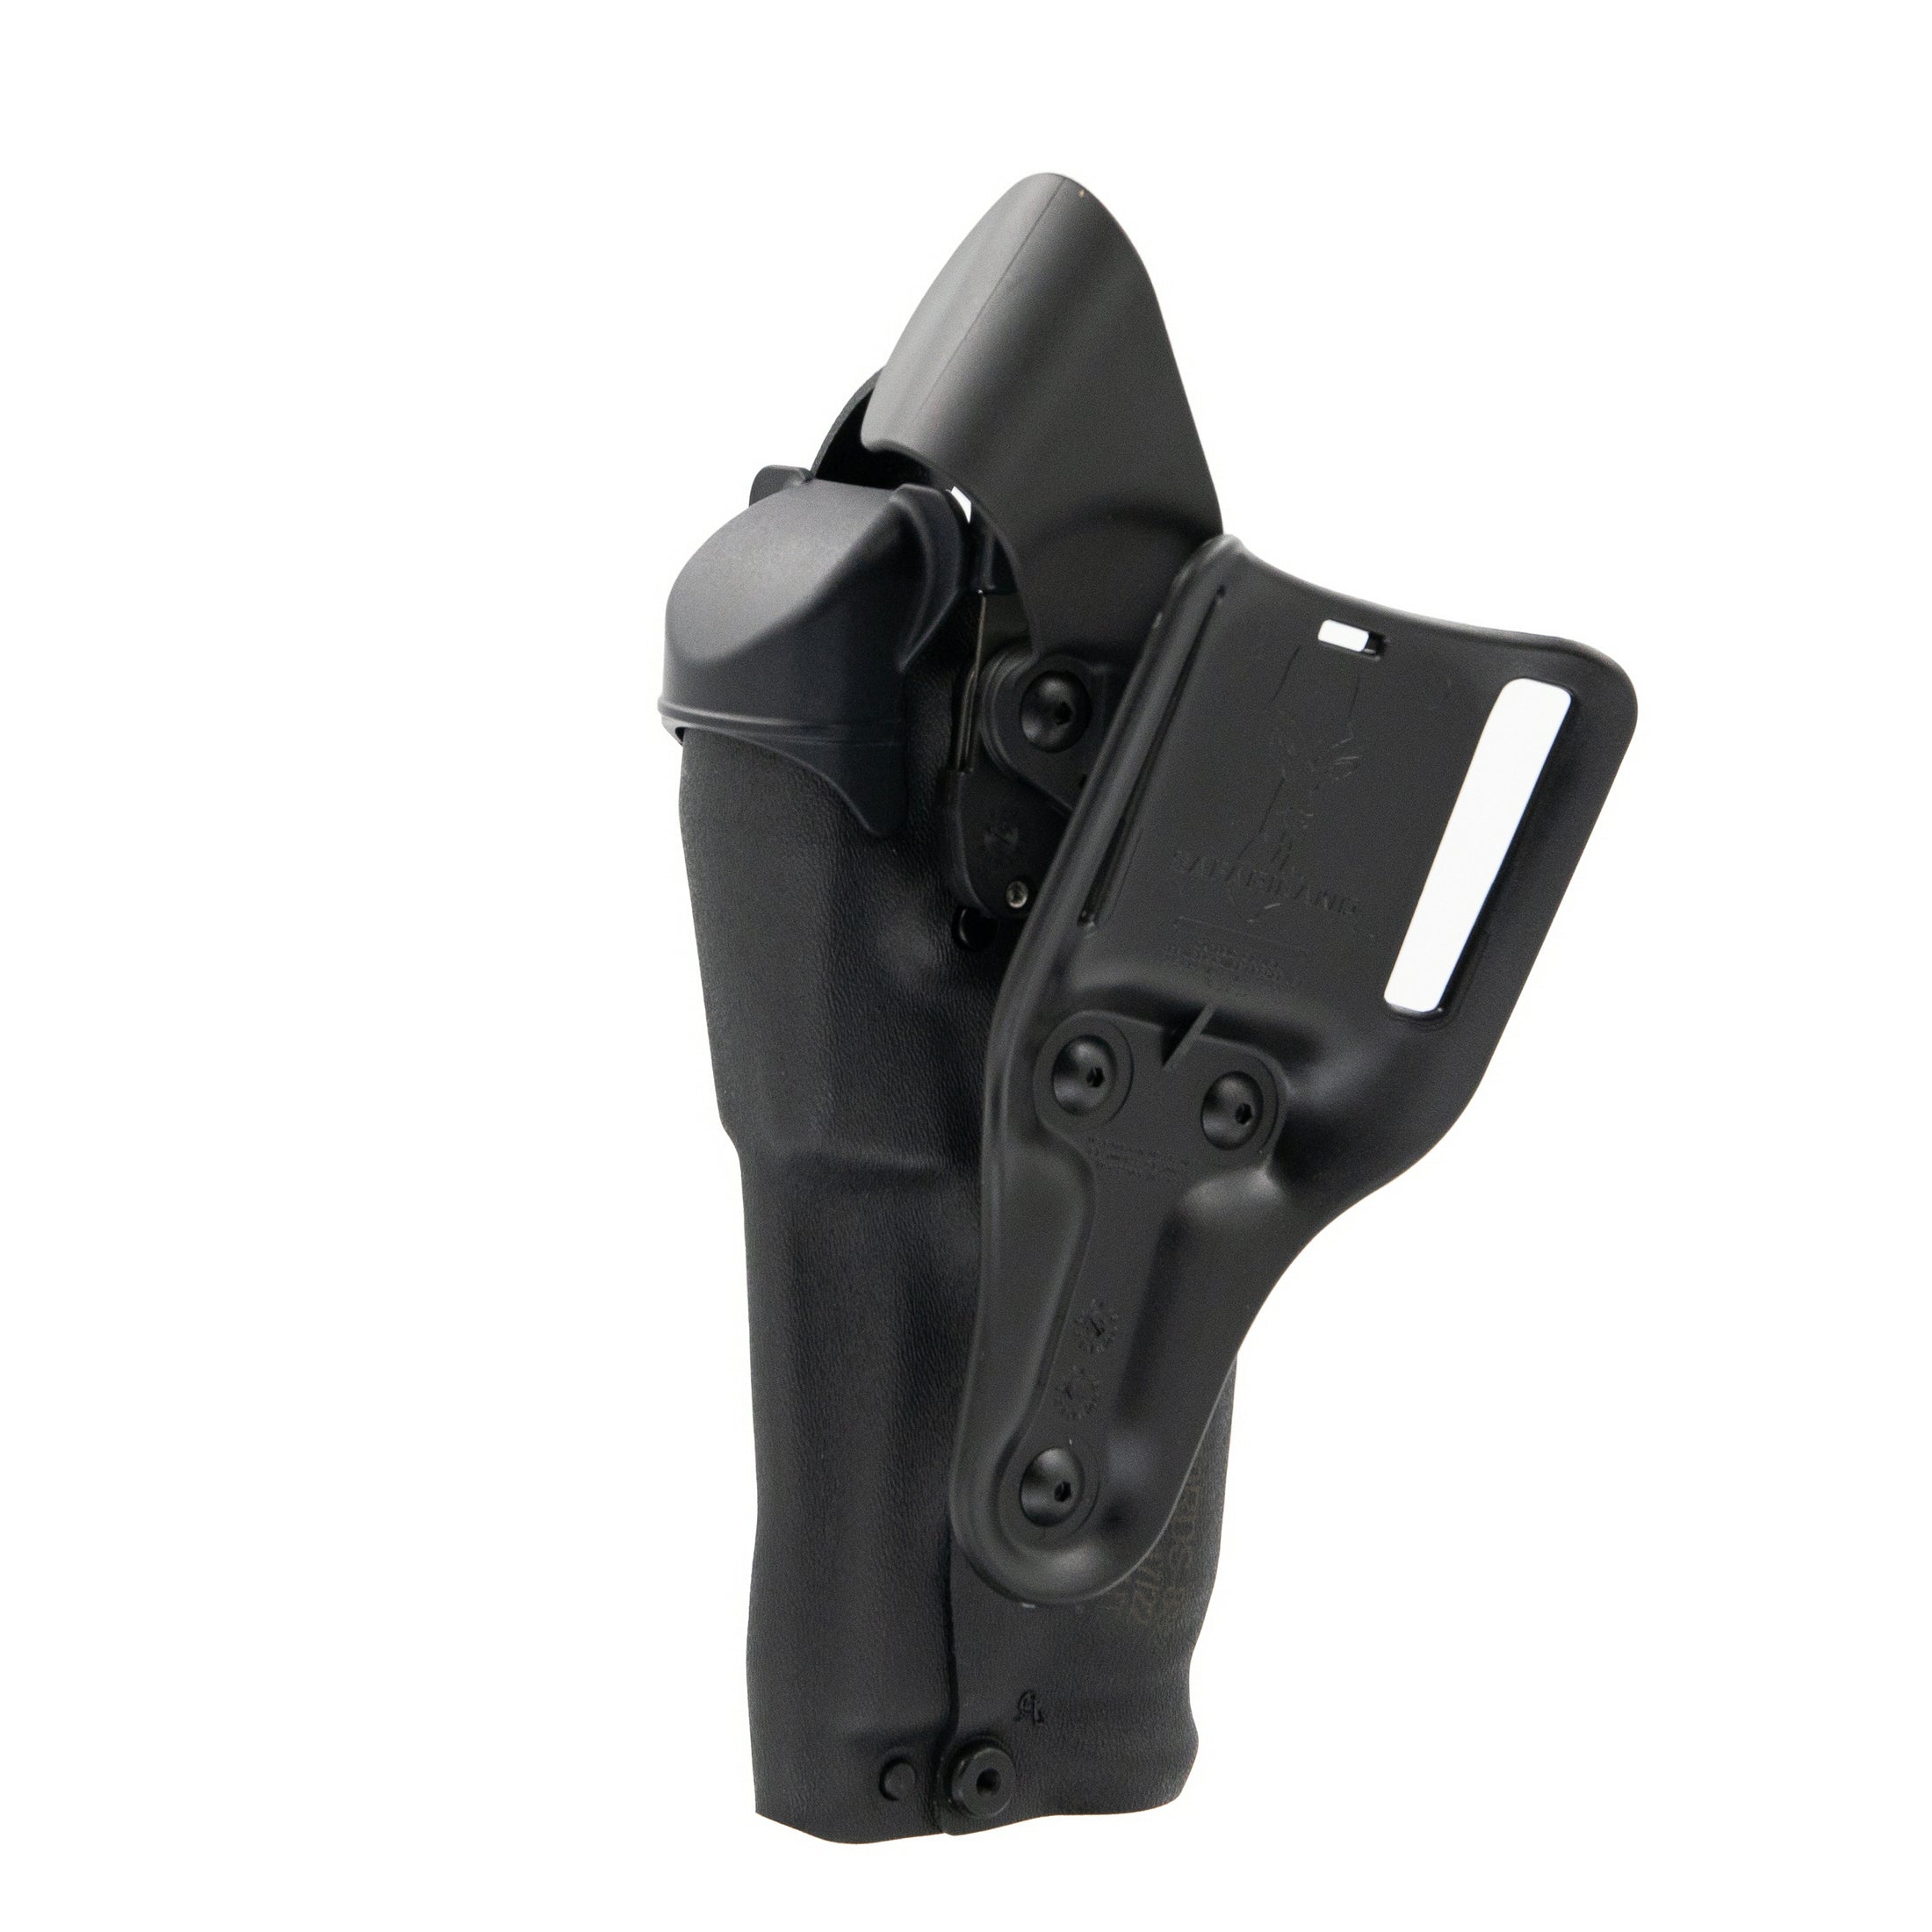 Safariland 6360 ALS STX Level III Plus UBL Duty Holster FREE SHIPPING!